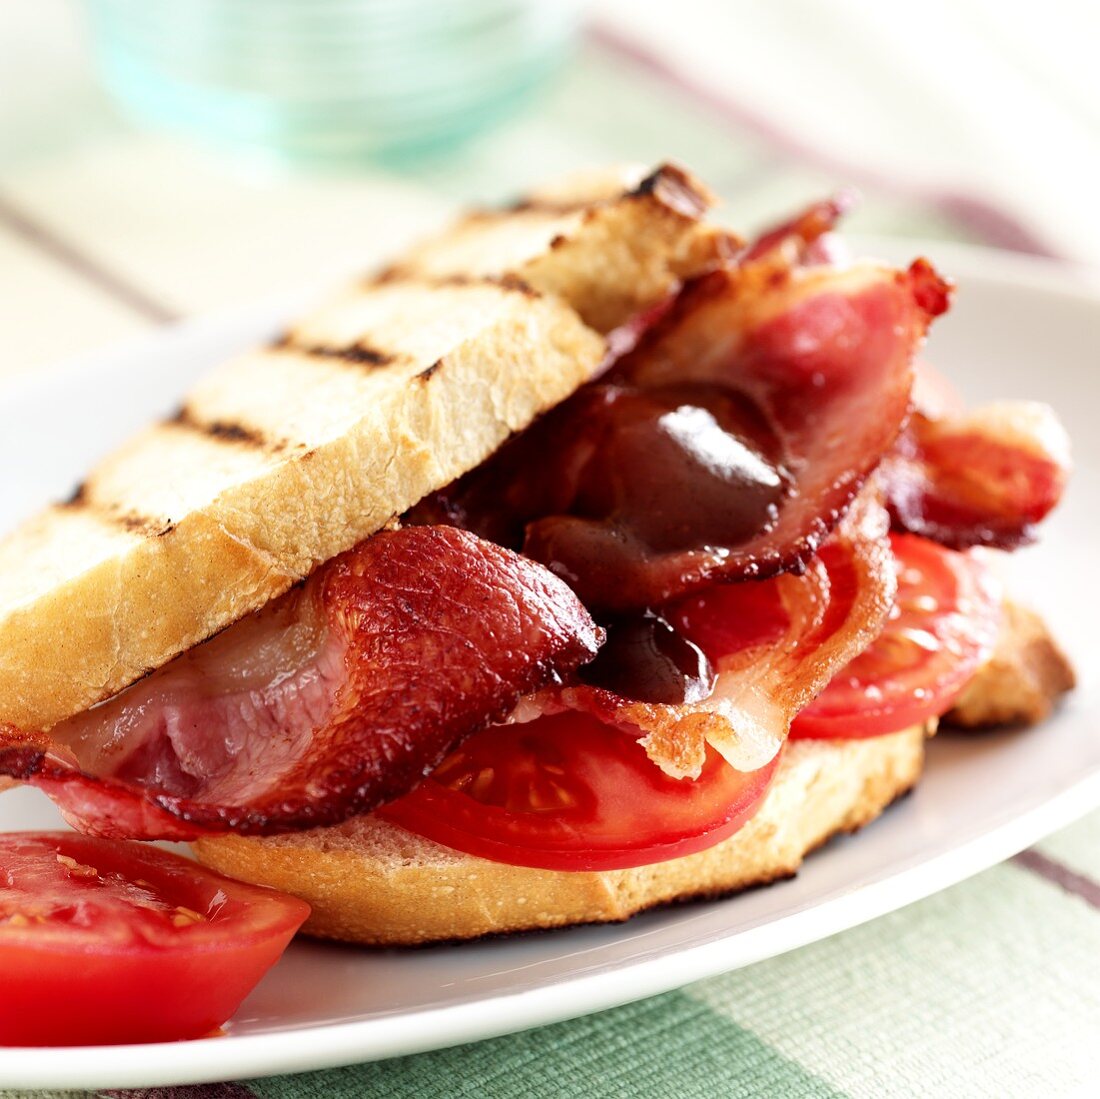 Toasted sandwich with bacon and tomatoes